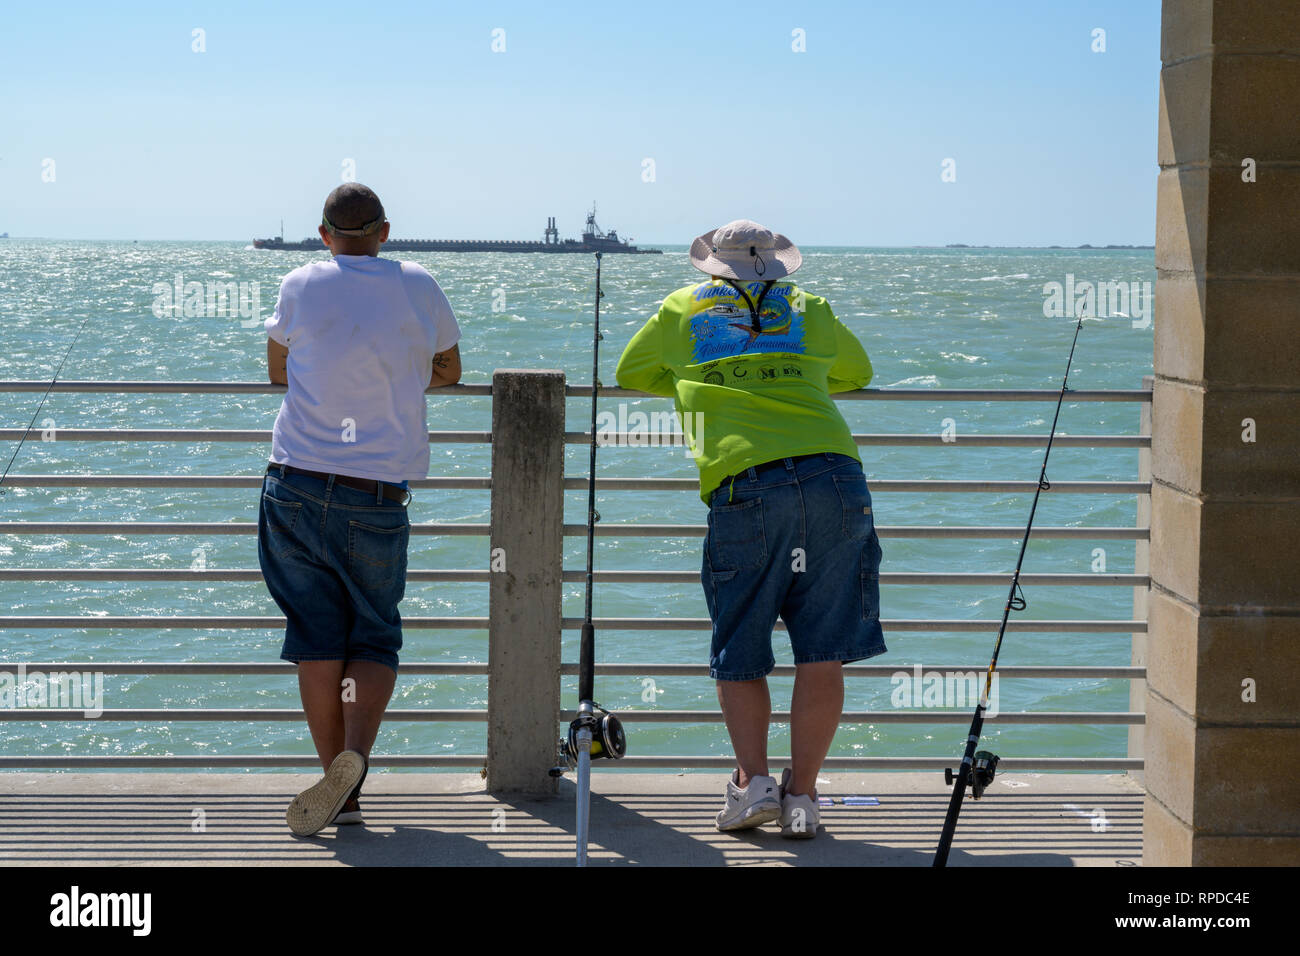 Fort De Soto Park, Florida -- February 17, 2019. Two fishermen on a pier pause to watch a large ship go by. Stock Photo